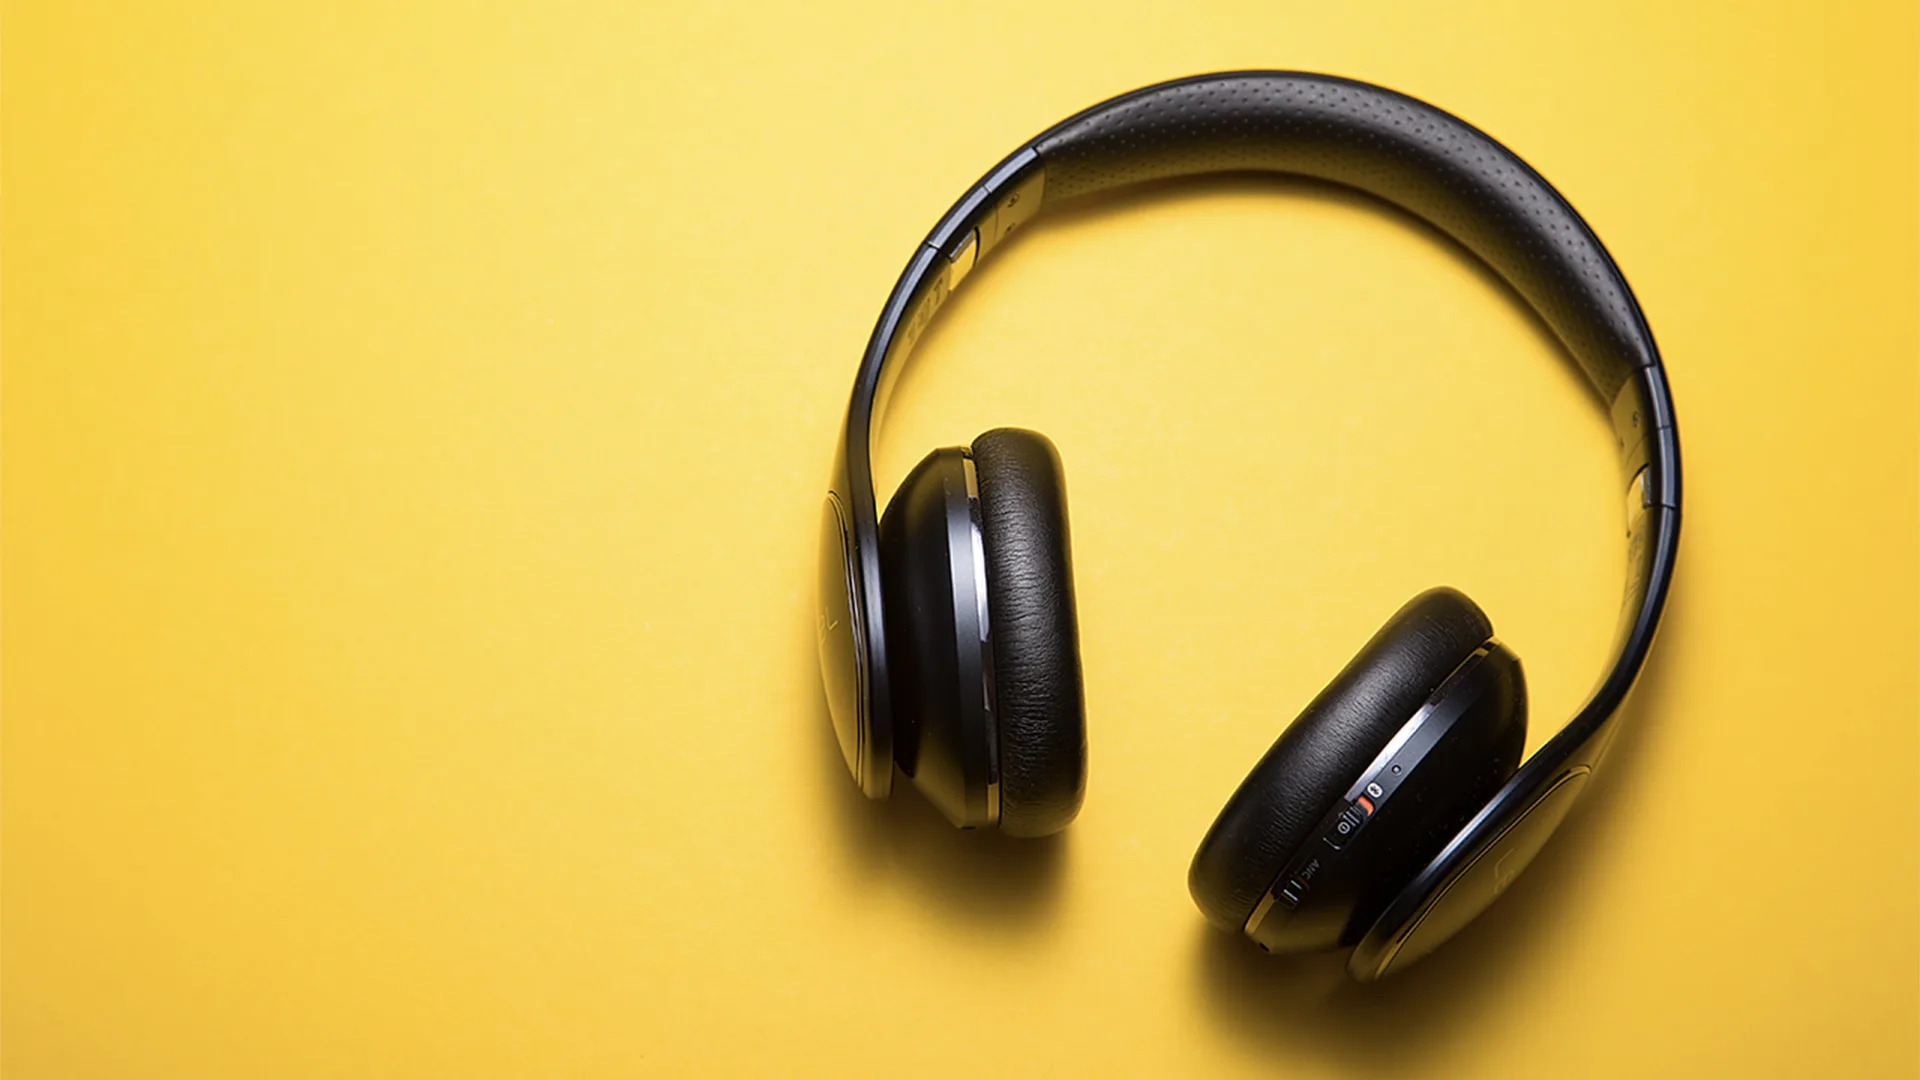 Wireless headphones on a yellow background